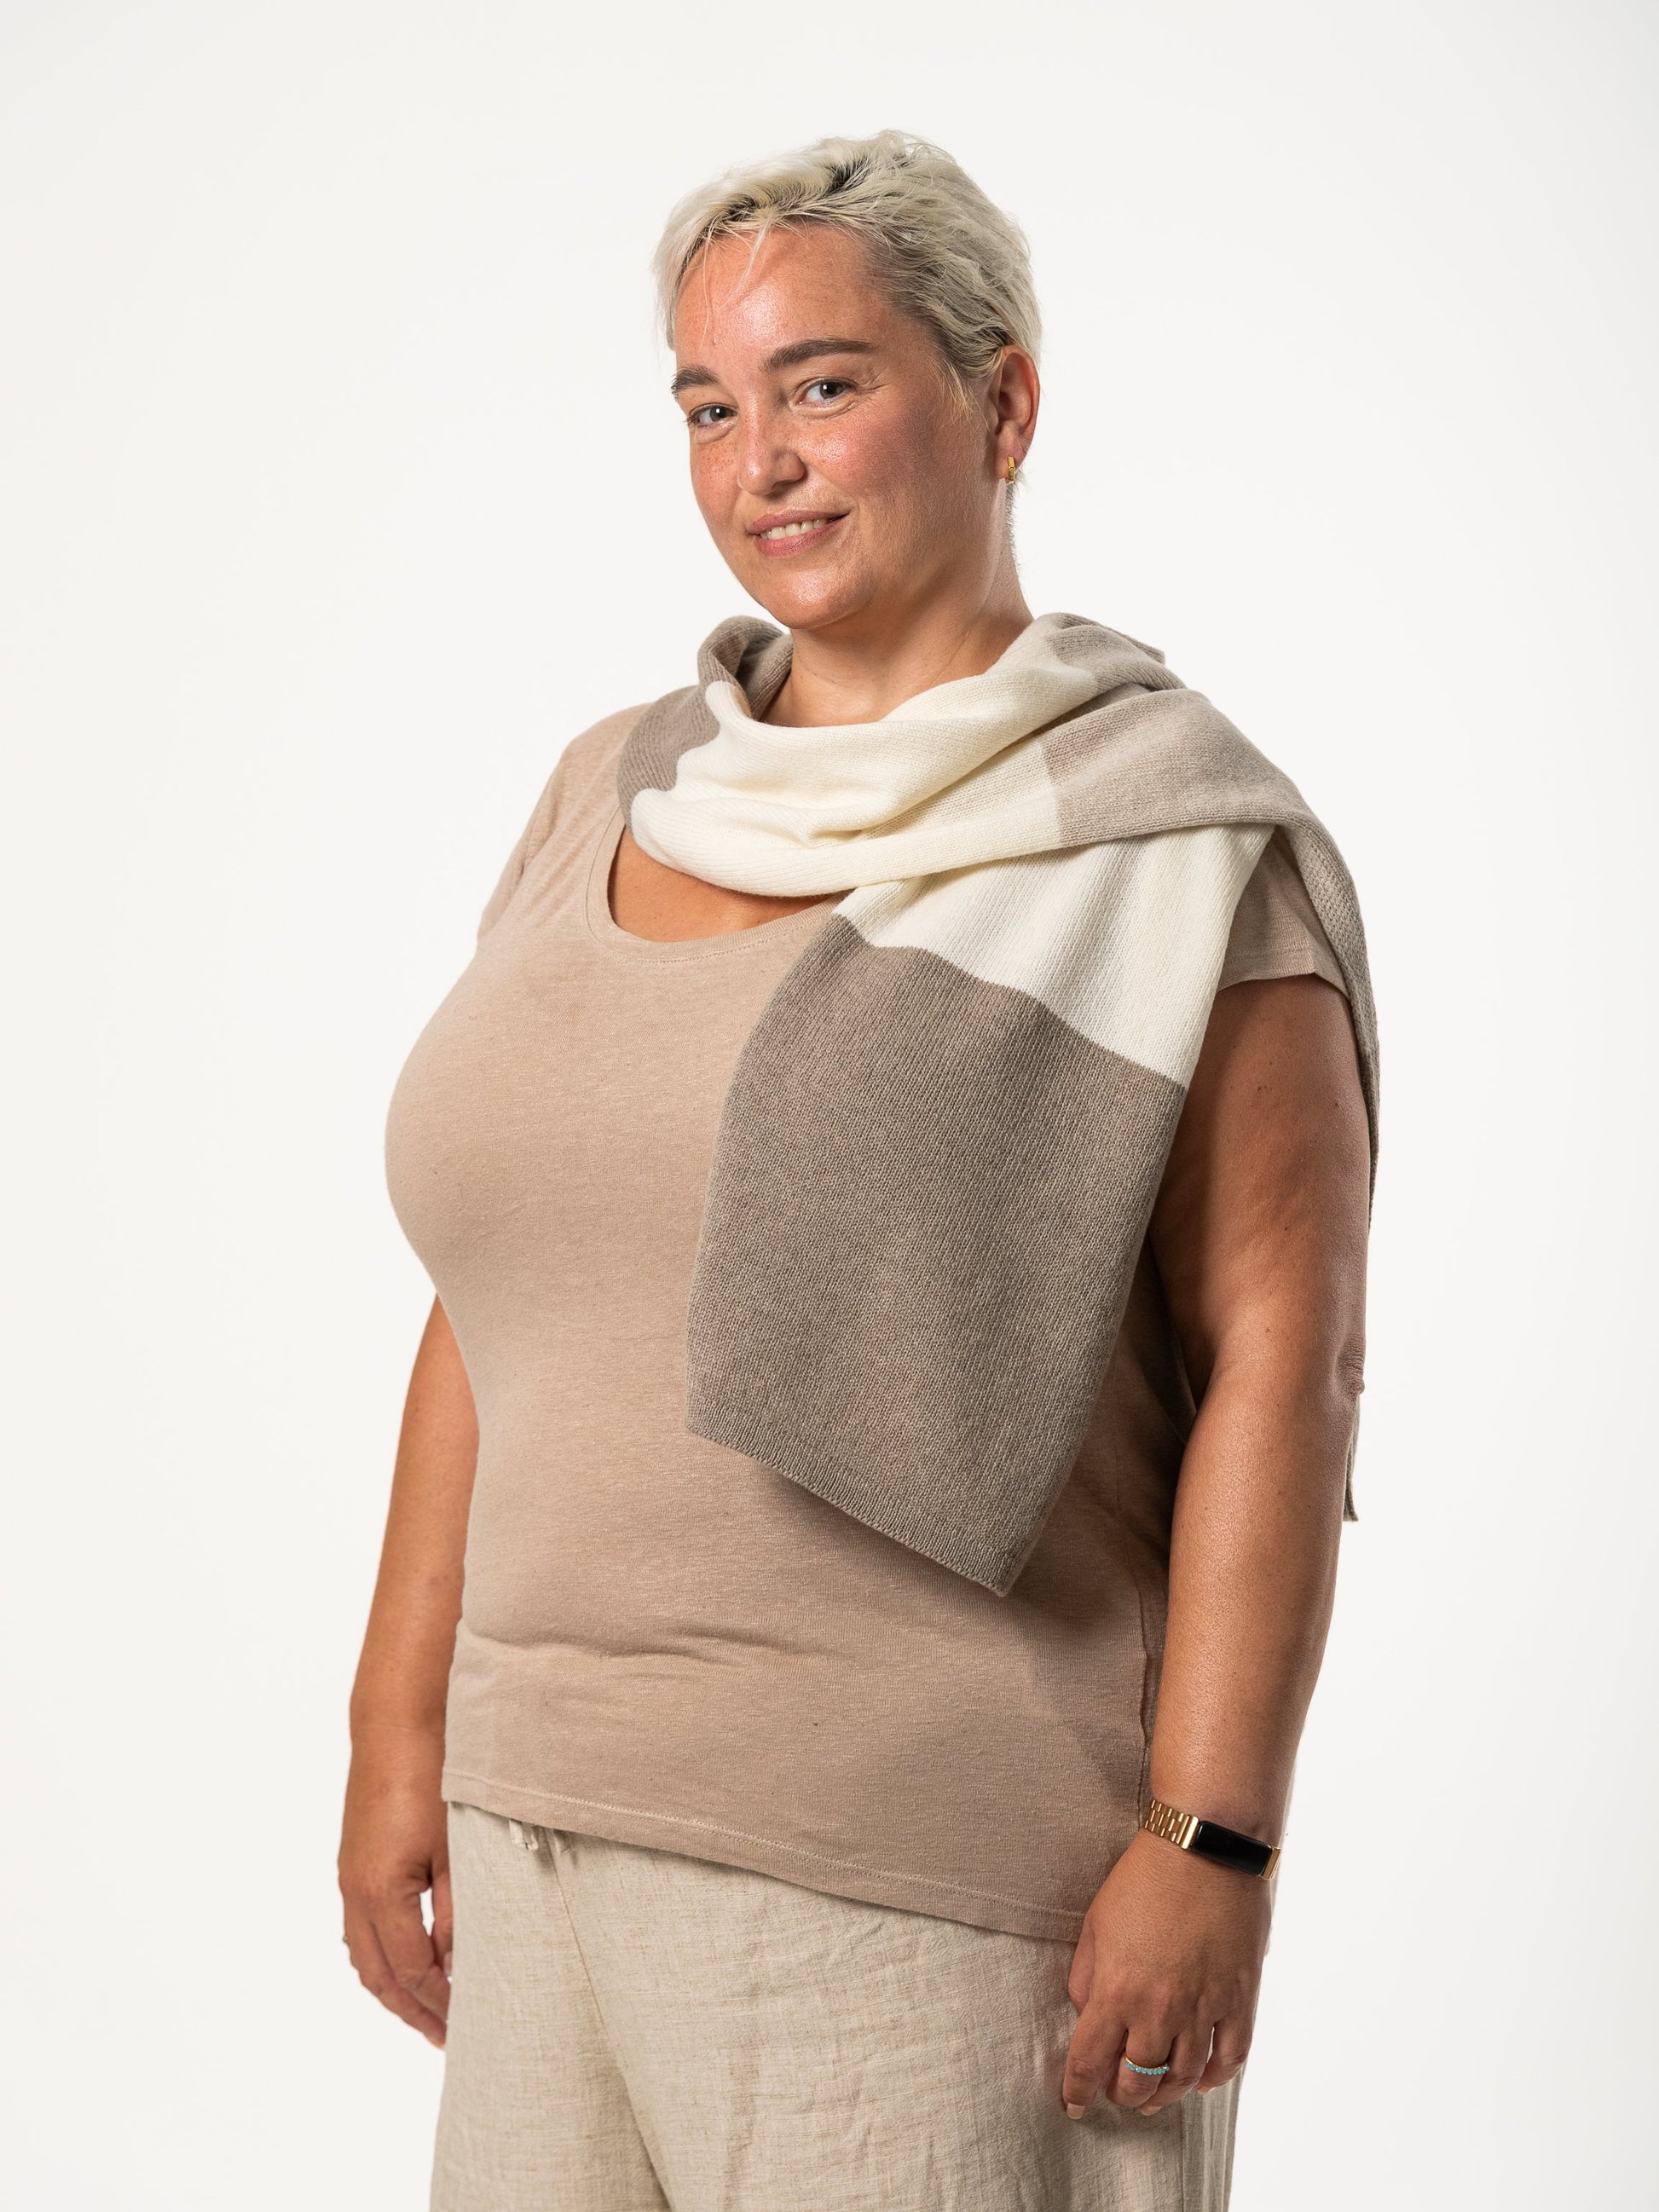 white woman wearing a cream and grey merino wool scarf - Woolkind